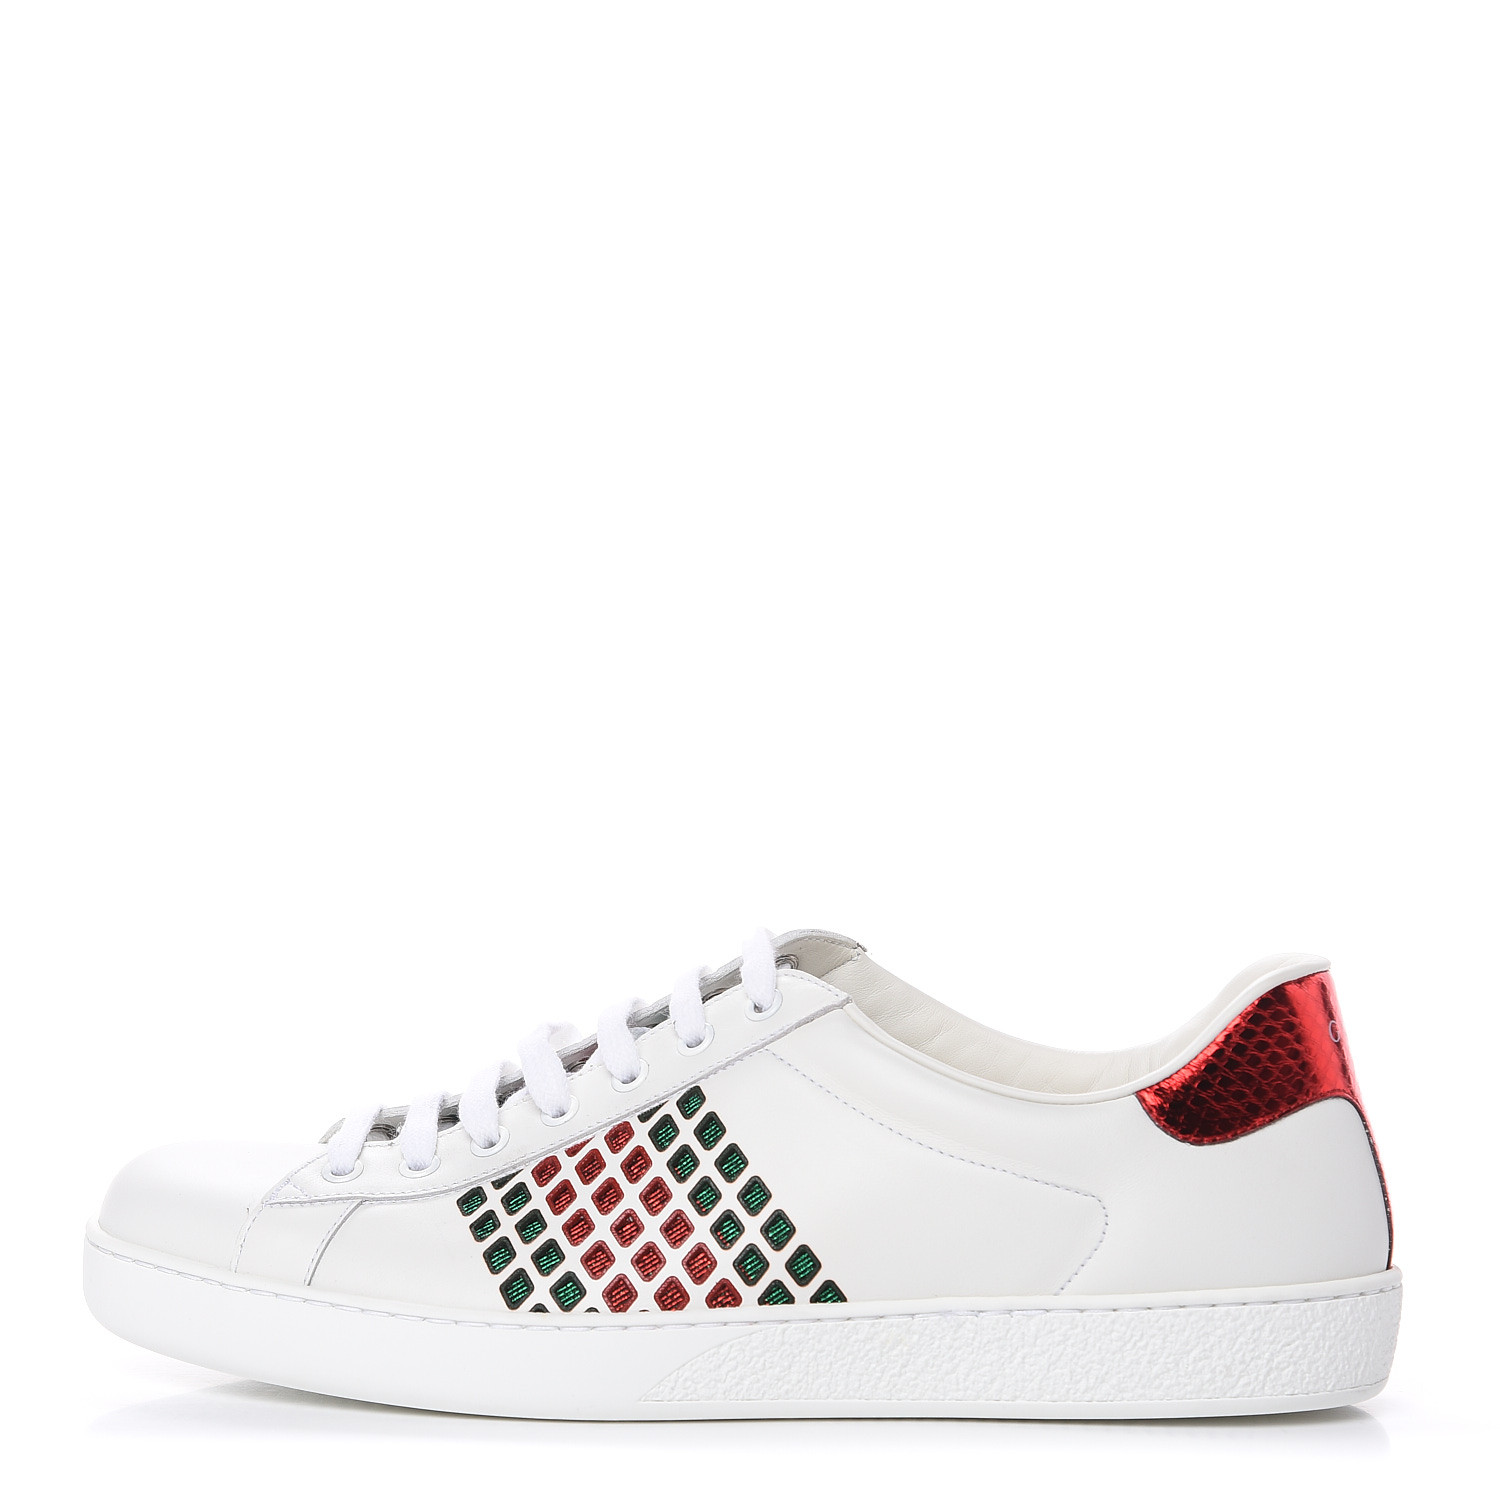 GUCCI Calfskin Mens Ace Sneakers 10.5 White Green 494775